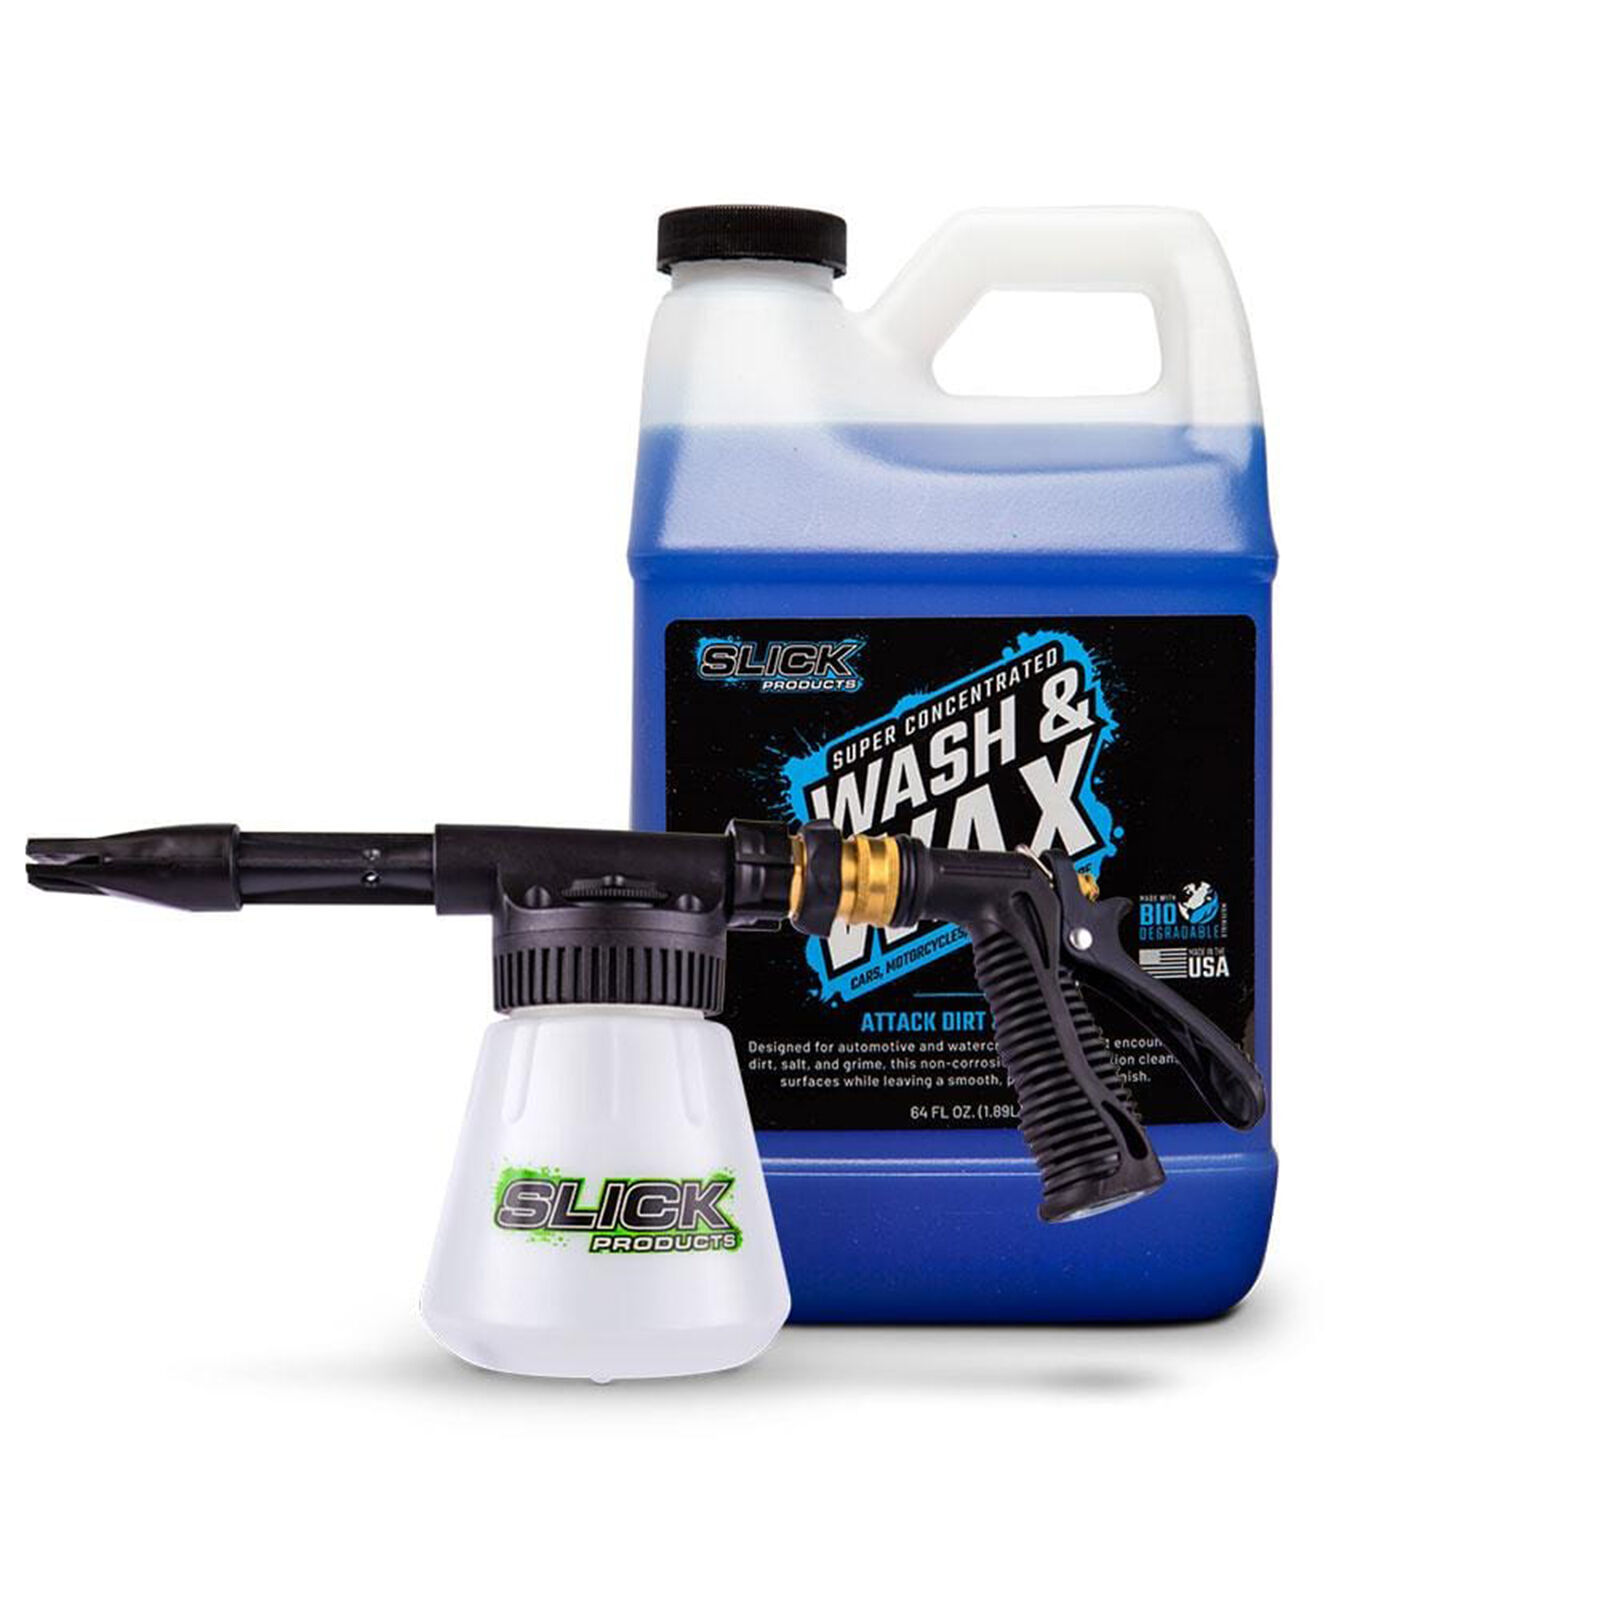 Slick Products Sp1134 Hose-powered Foam Gun Bundle | W/ Wash & Wax Concentrate